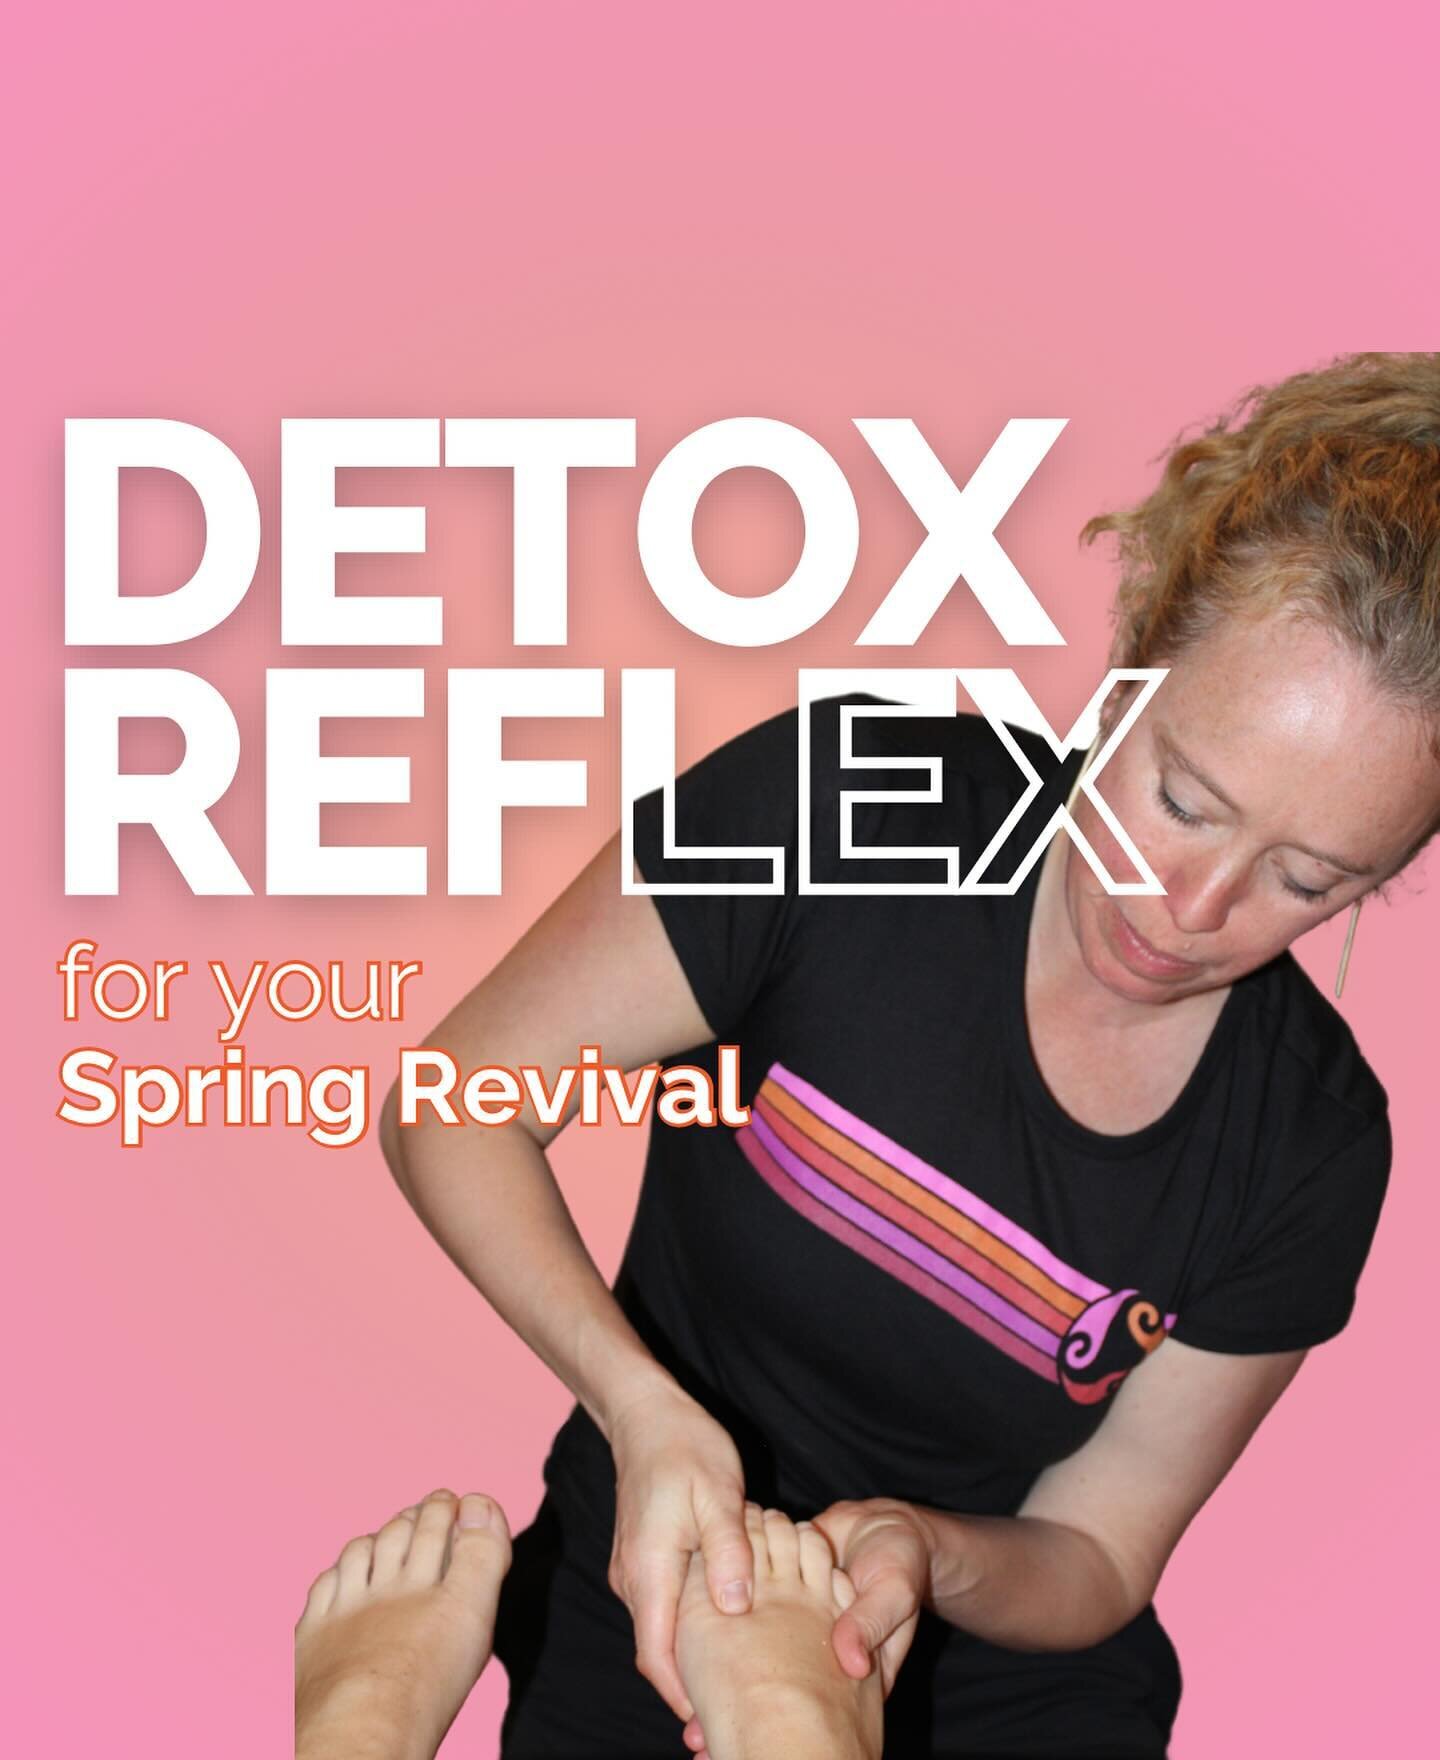 Detox Reflexology is the perfect way to support your body&rsquo;s reawakening this spring. 

This customized session is designed to aid in the detoxification process by focusing on the:

🌷Lungs
🌷Kidneys
🌷Colon
🌷Liver 
🌷Lymphatic System

Book you